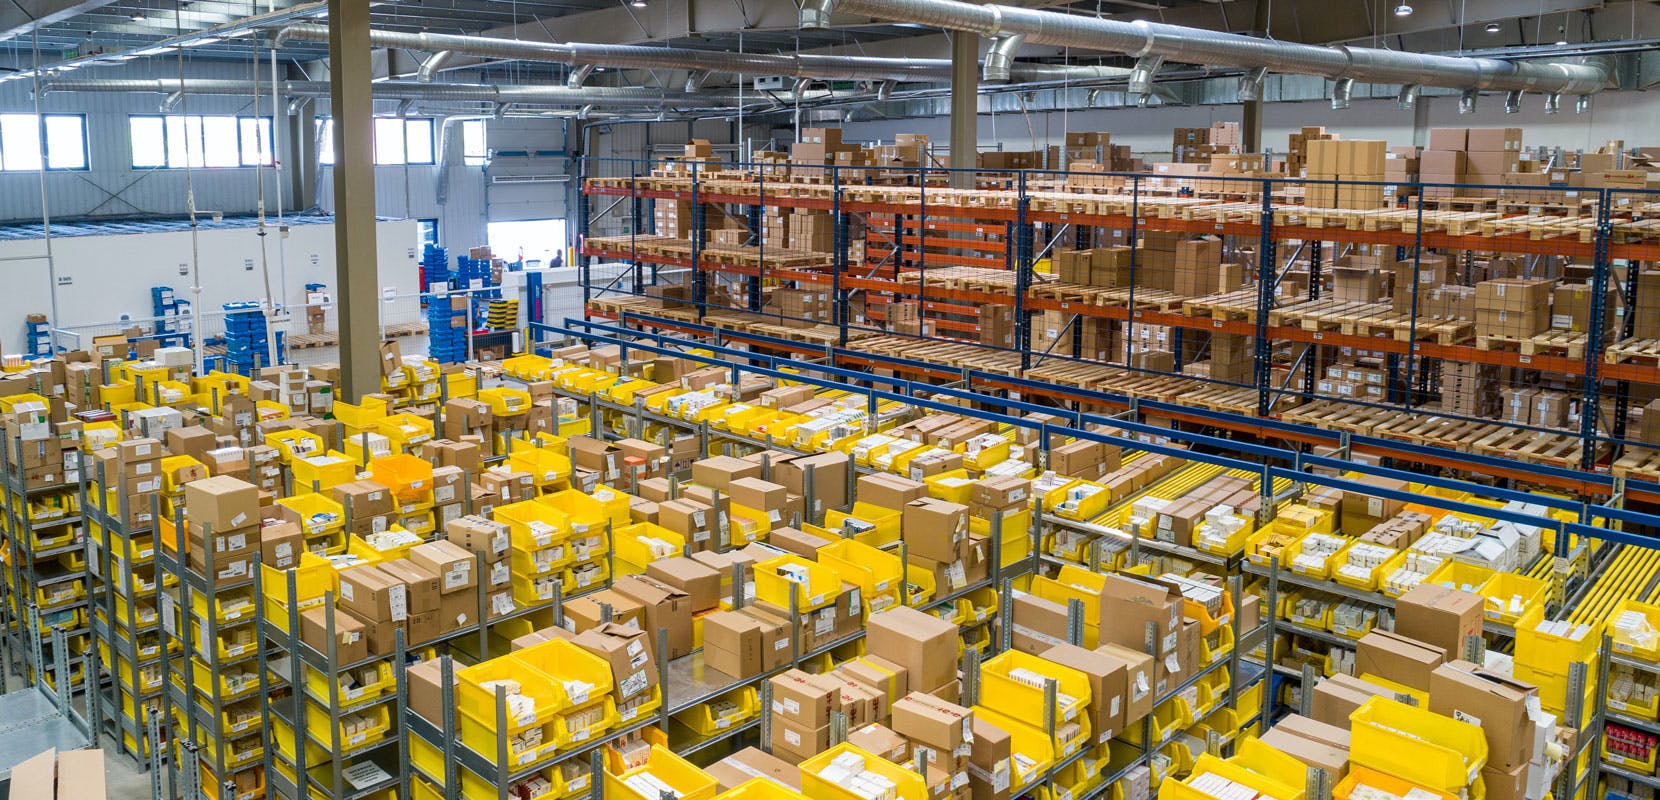 Large warehouse or distribution center. 